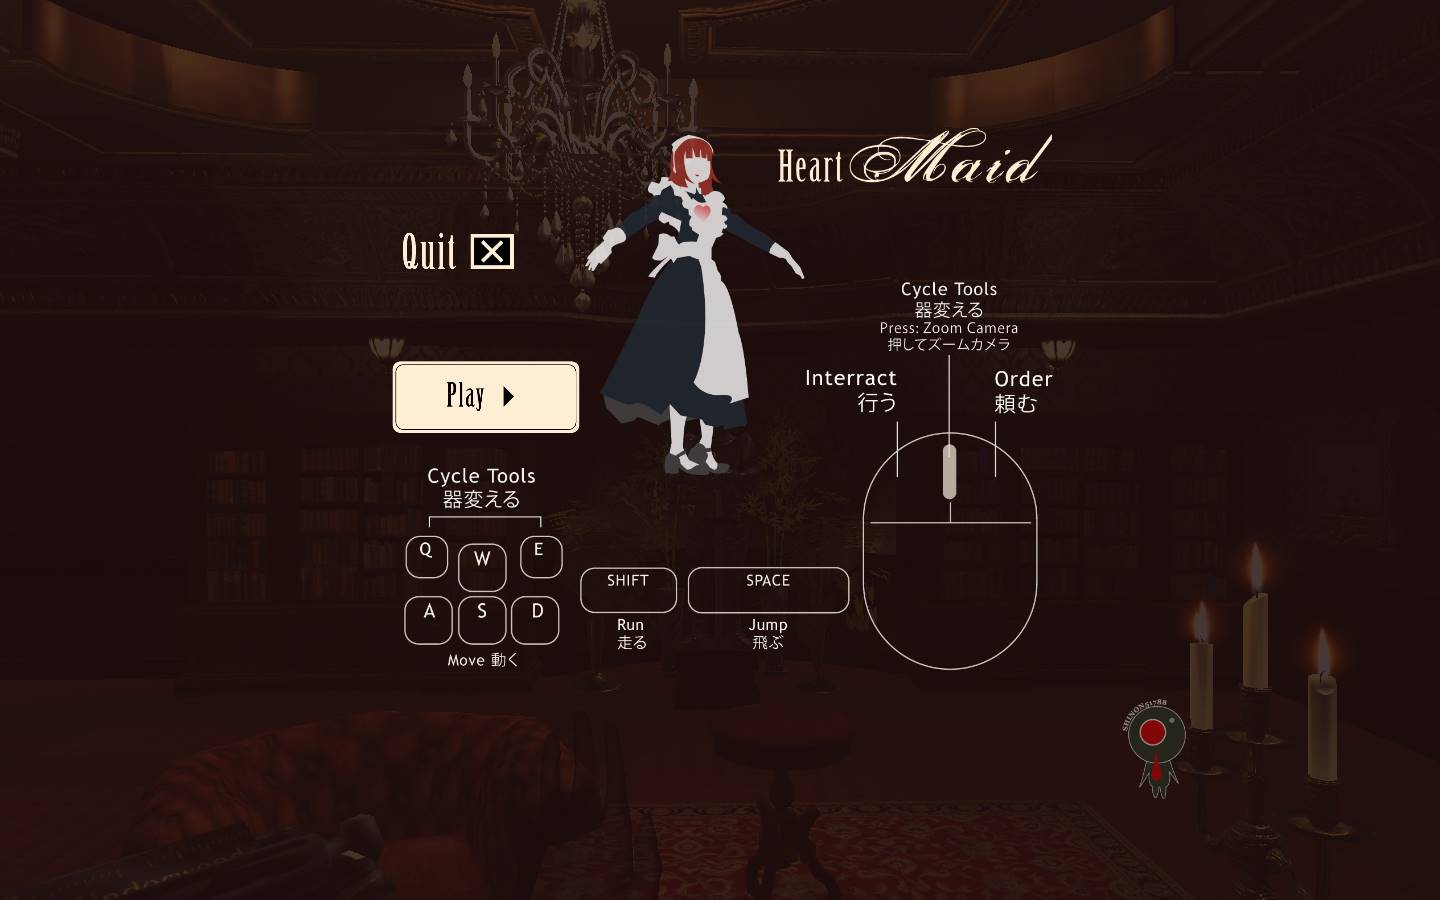 heartbeat - heart maid mansion - video 3